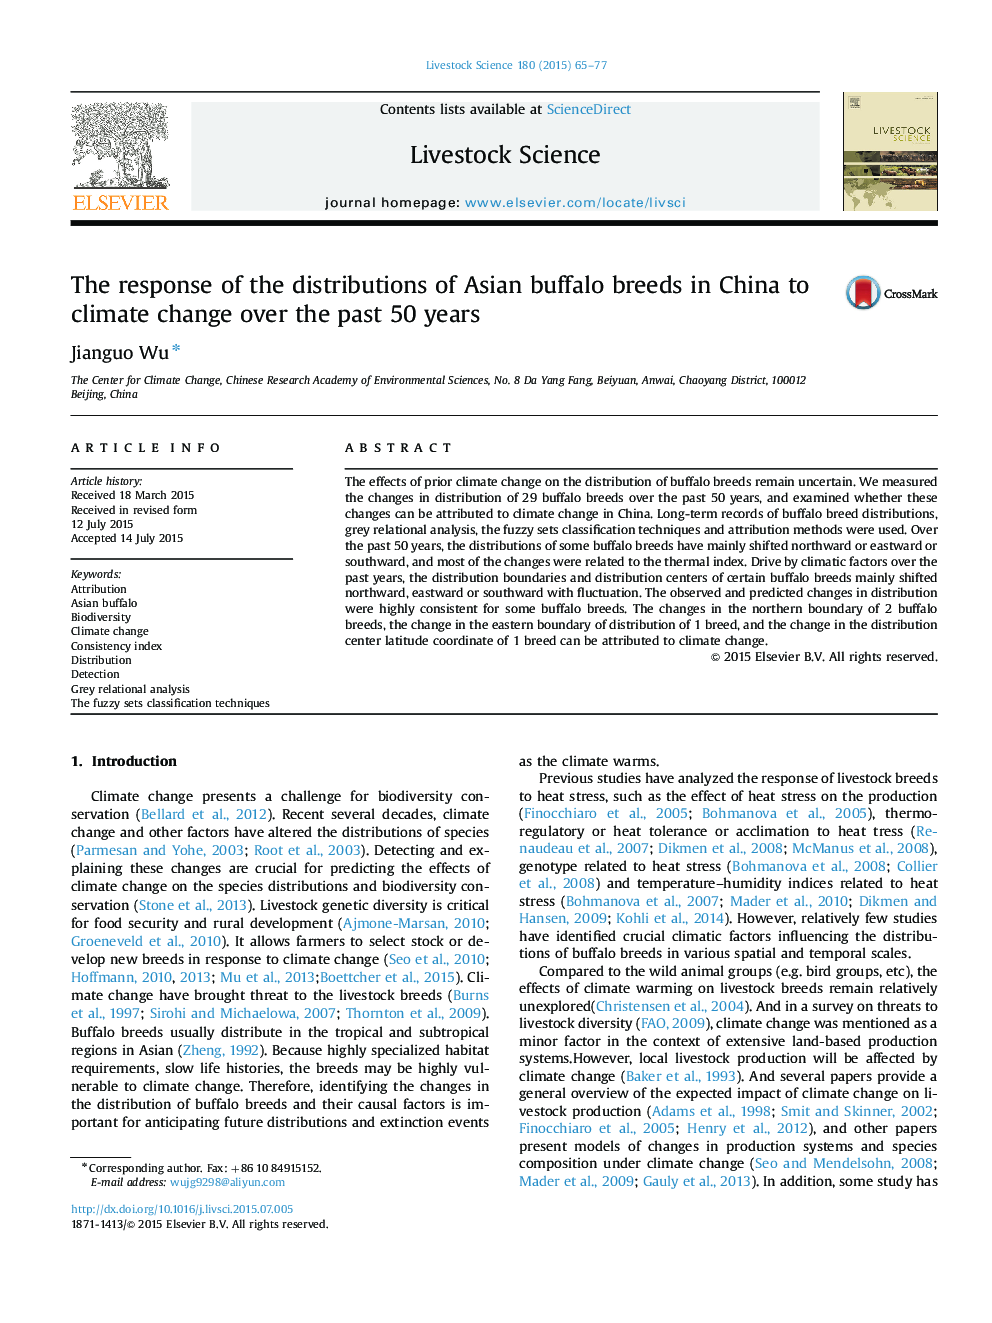 The response of the distributions of Asian buffalo breeds in China to climate change over the past 50 years